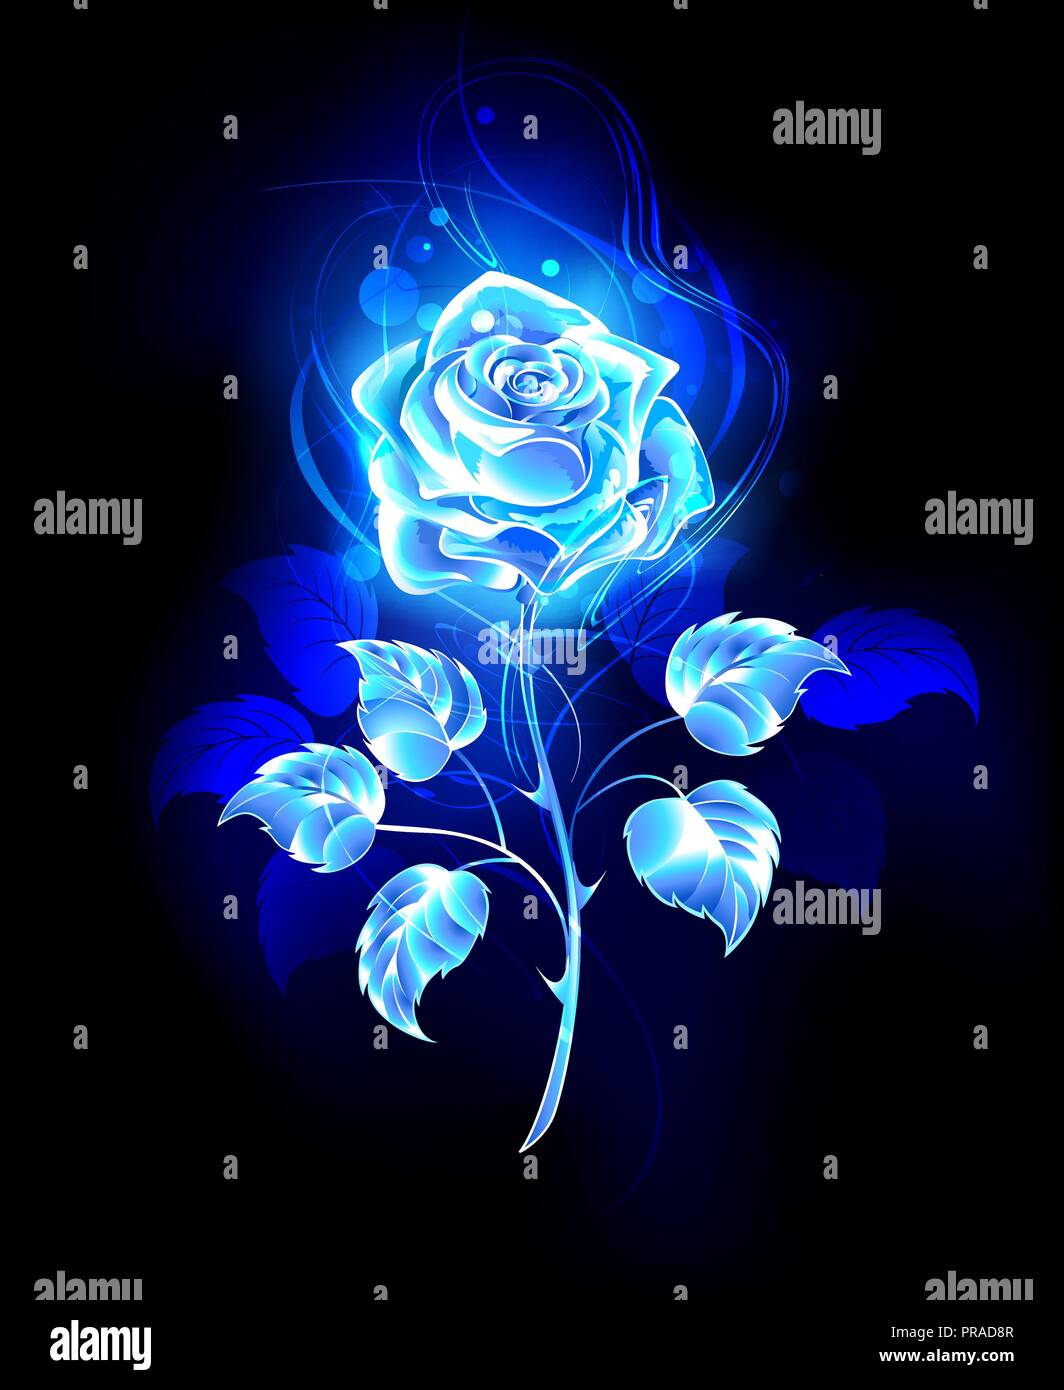 Blooming, abstract rose from blue flame on black background. Stock Vector